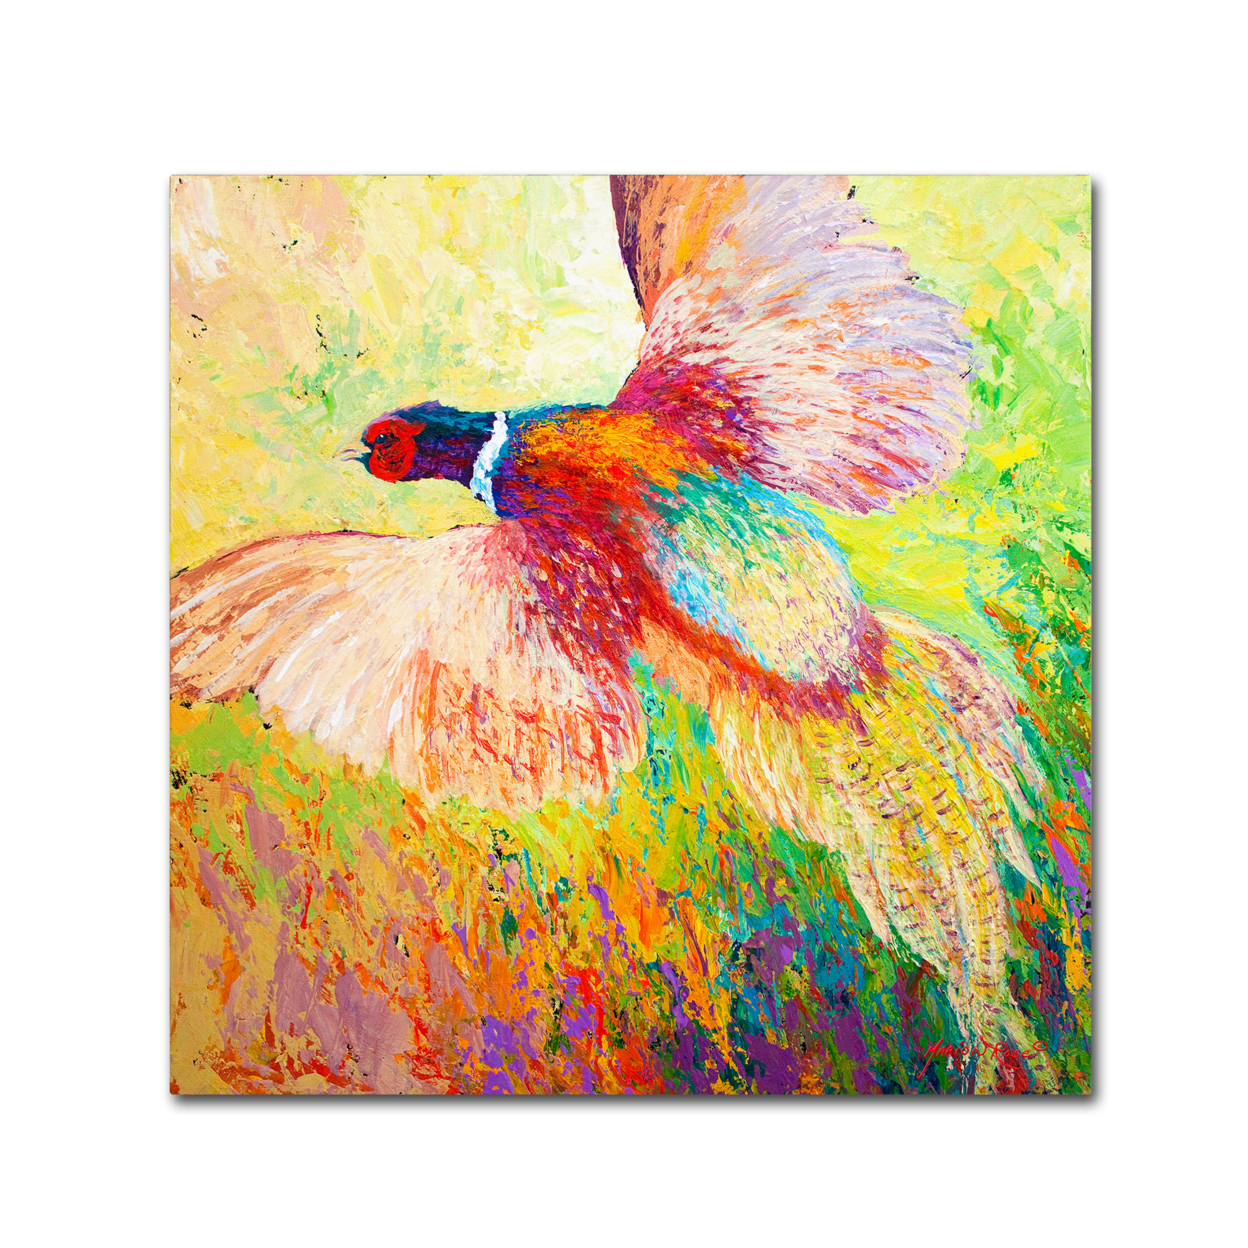 Marion Rose 'Pheasant 1' Ready To Hang Canvas Art 35 X 35 Inches Made In USA